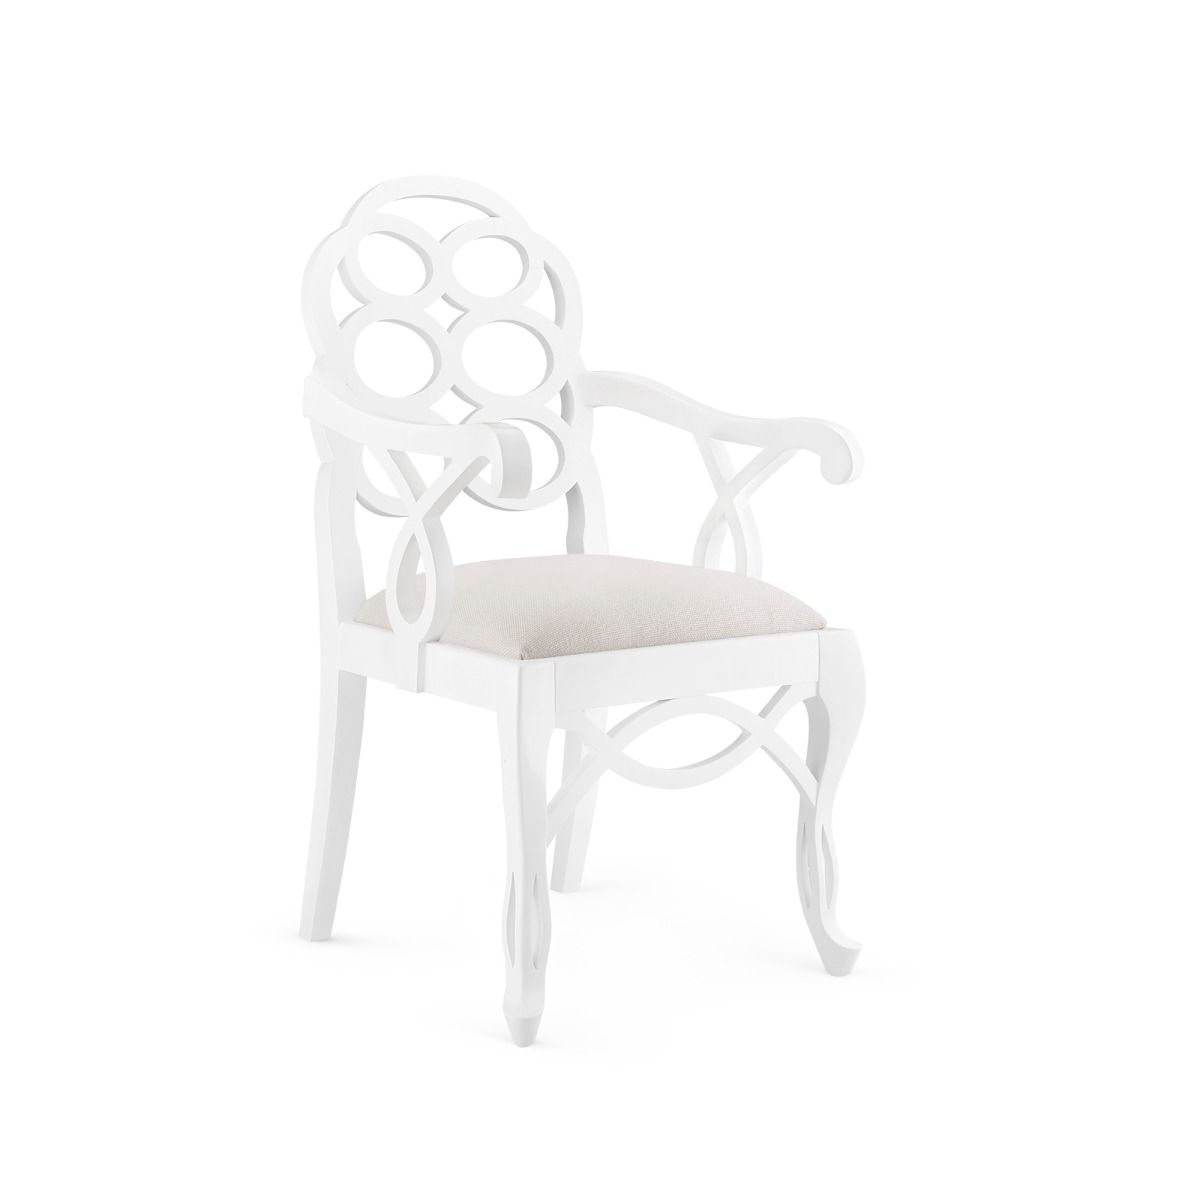 Loop Armchair, White Dining Chair Bungalow 5     Four Hands, Burke Decor, Mid Century Modern Furniture, Old Bones Furniture Company, Old Bones Co, Modern Mid Century, Designer Furniture, https://www.oldbonesco.com/